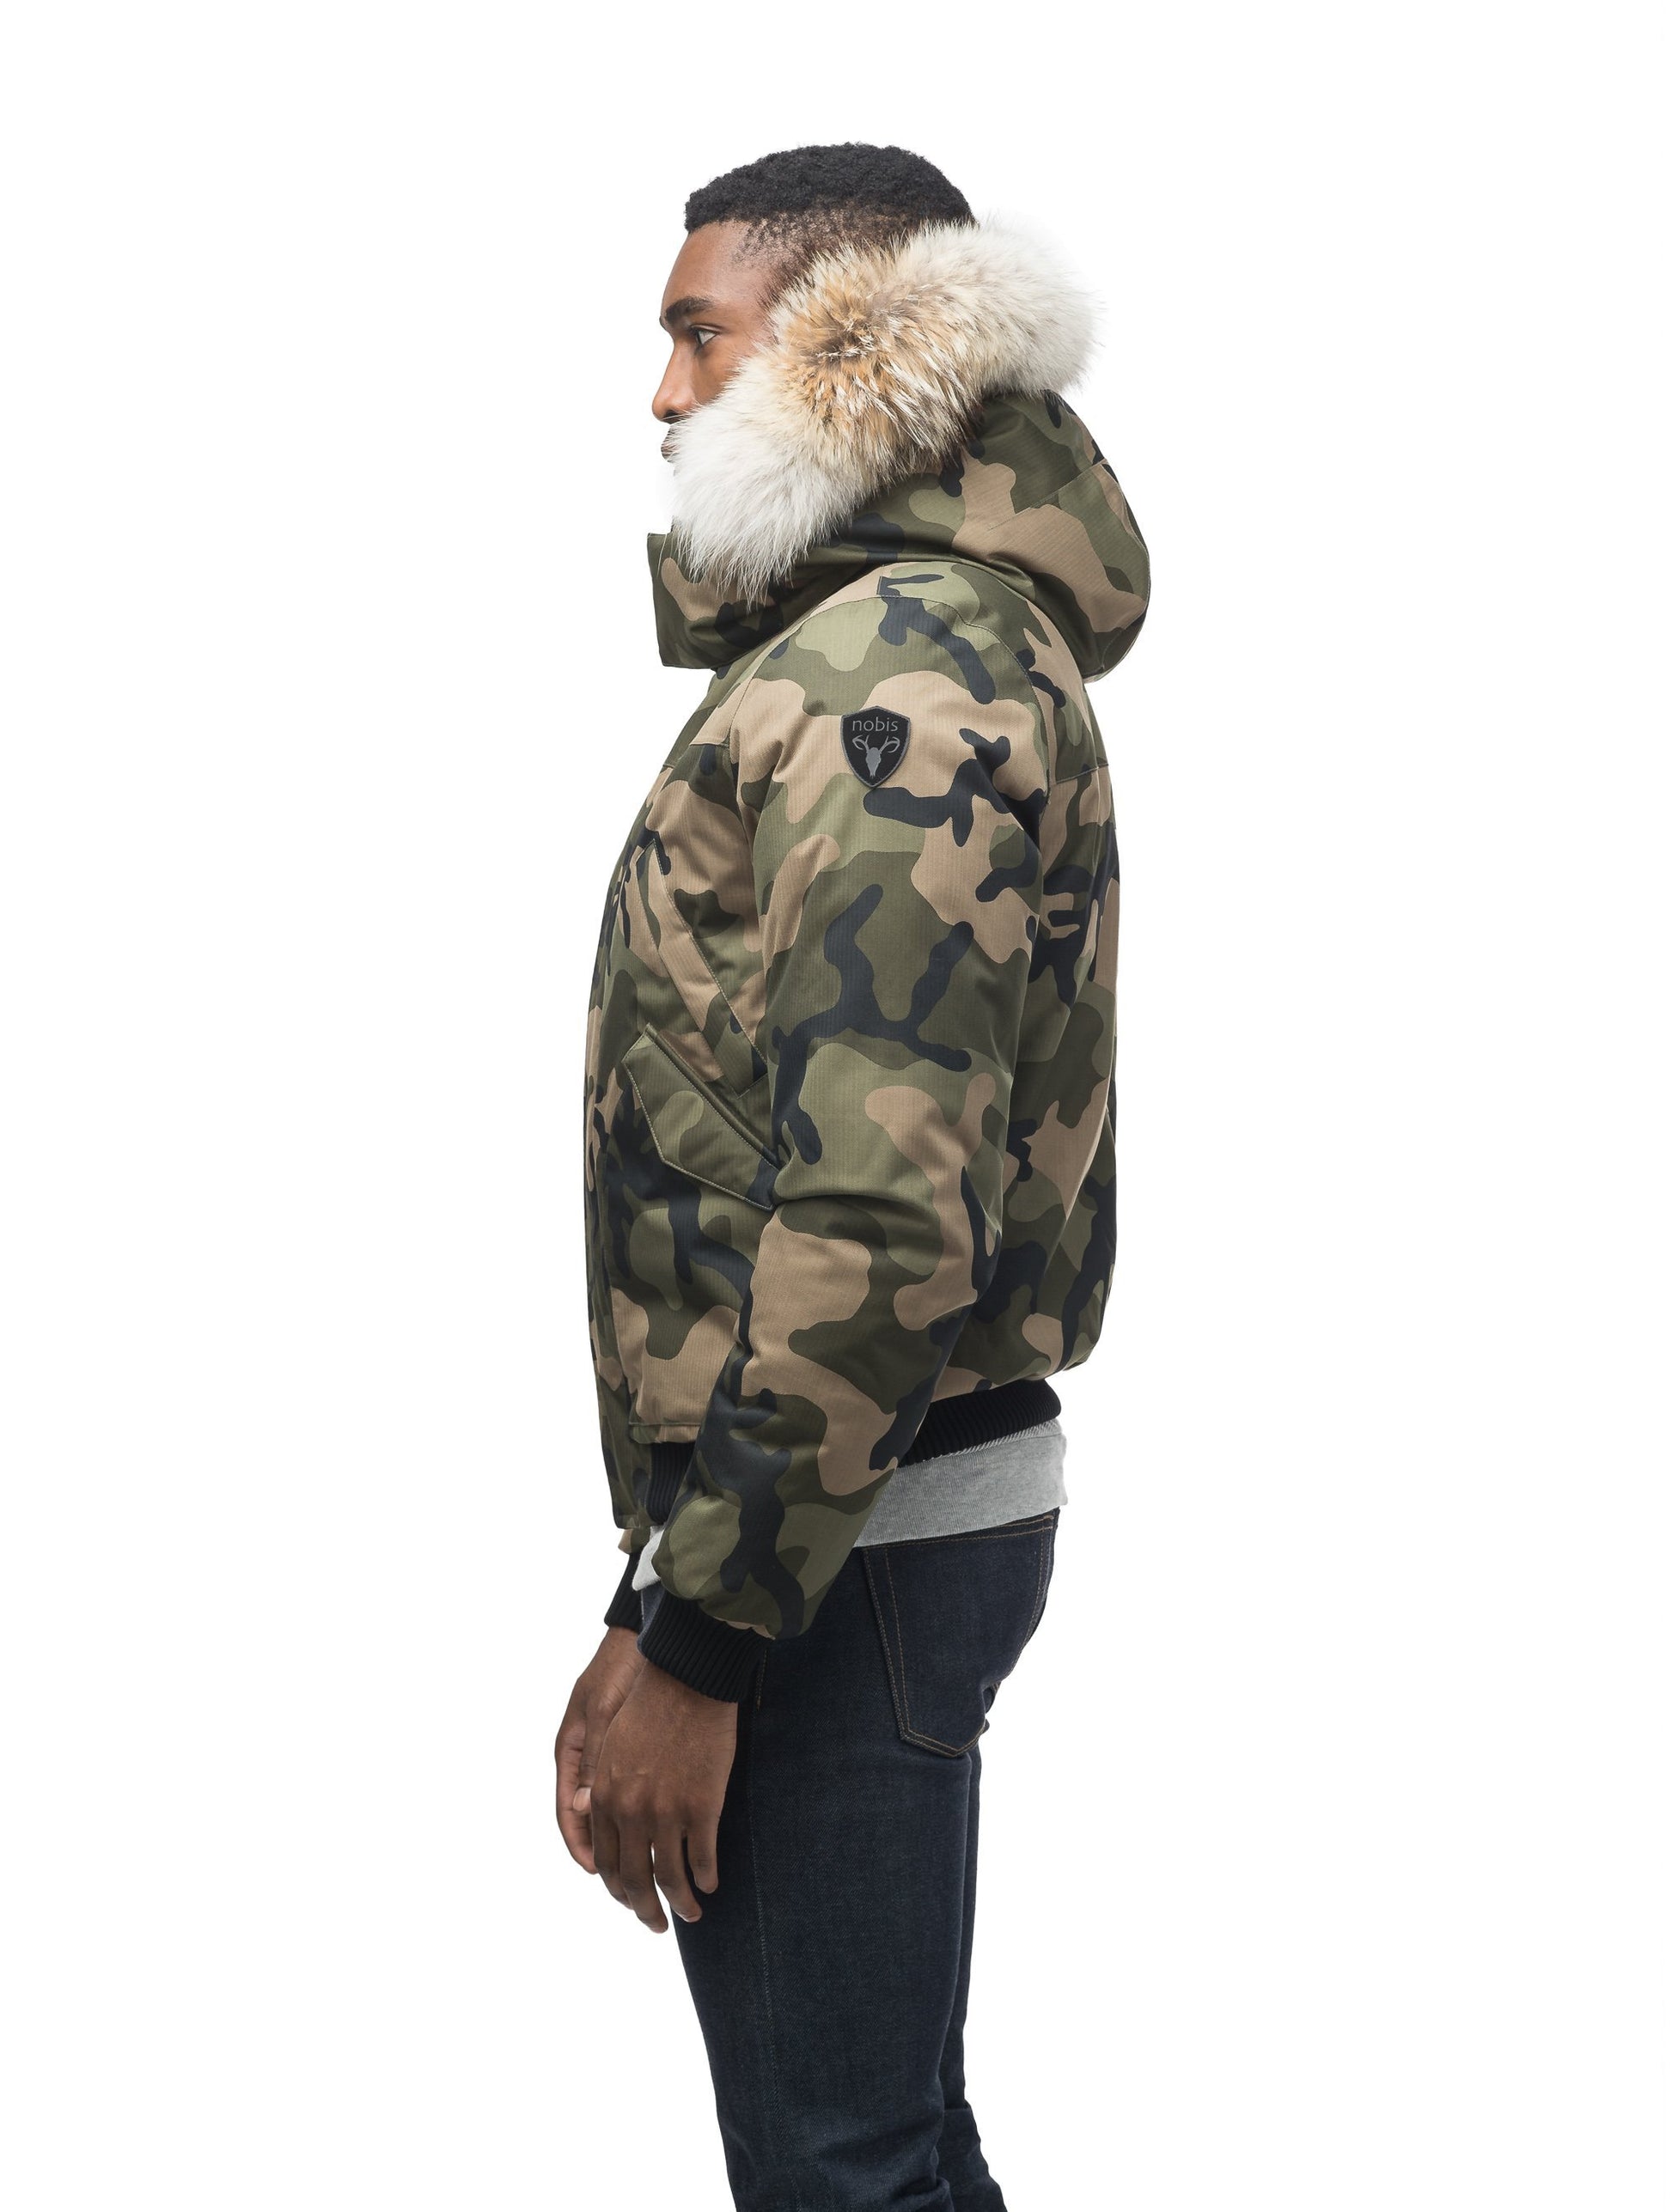 Men's classic down filled bomber jacket with a down filledÃ‚Â hood that features a removable coyote fur trim and concealed moldable framing wire in Camo